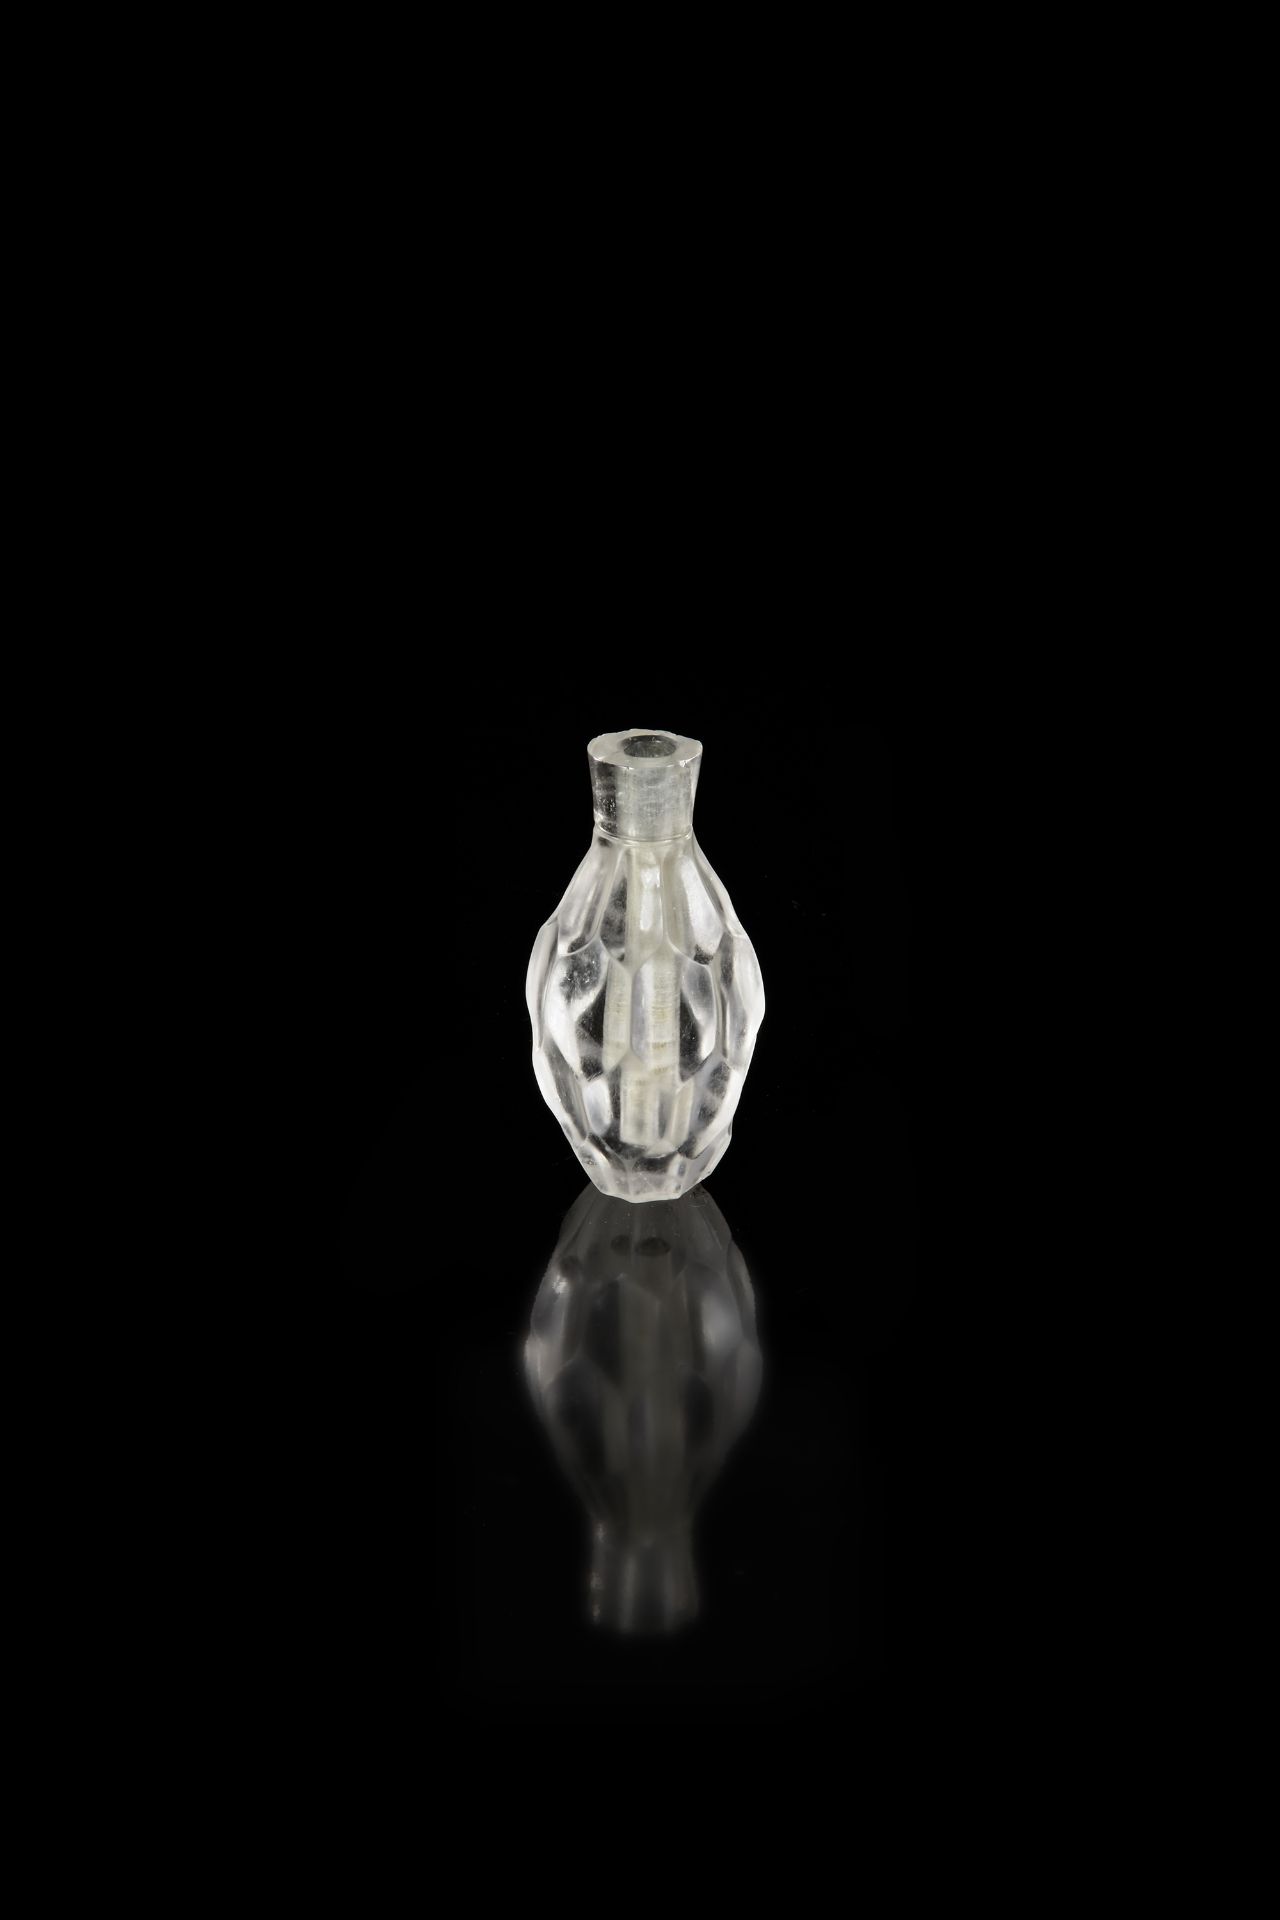 A FATIMID ROCK CRYSTAL PERFUME FLASK, EGYPT, 10TH-12TH CENTURY - Image 2 of 5